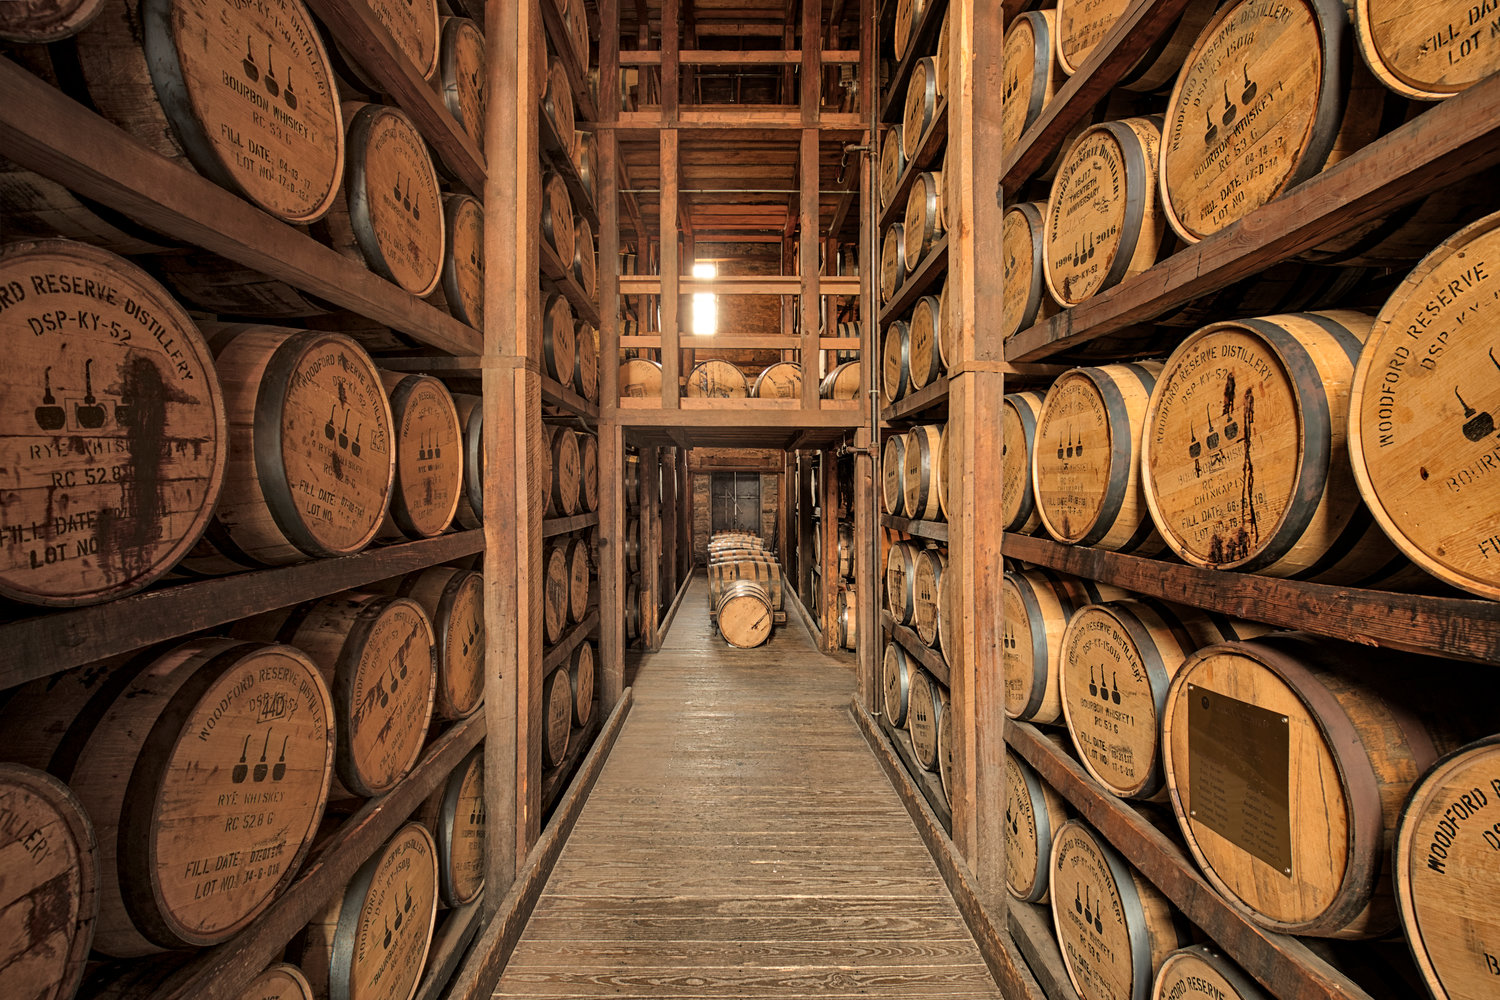 Join Trailways Travel in June 2023 to experience a warm Kentucky hug as they travel to the Kentucky Bourbon Trail.